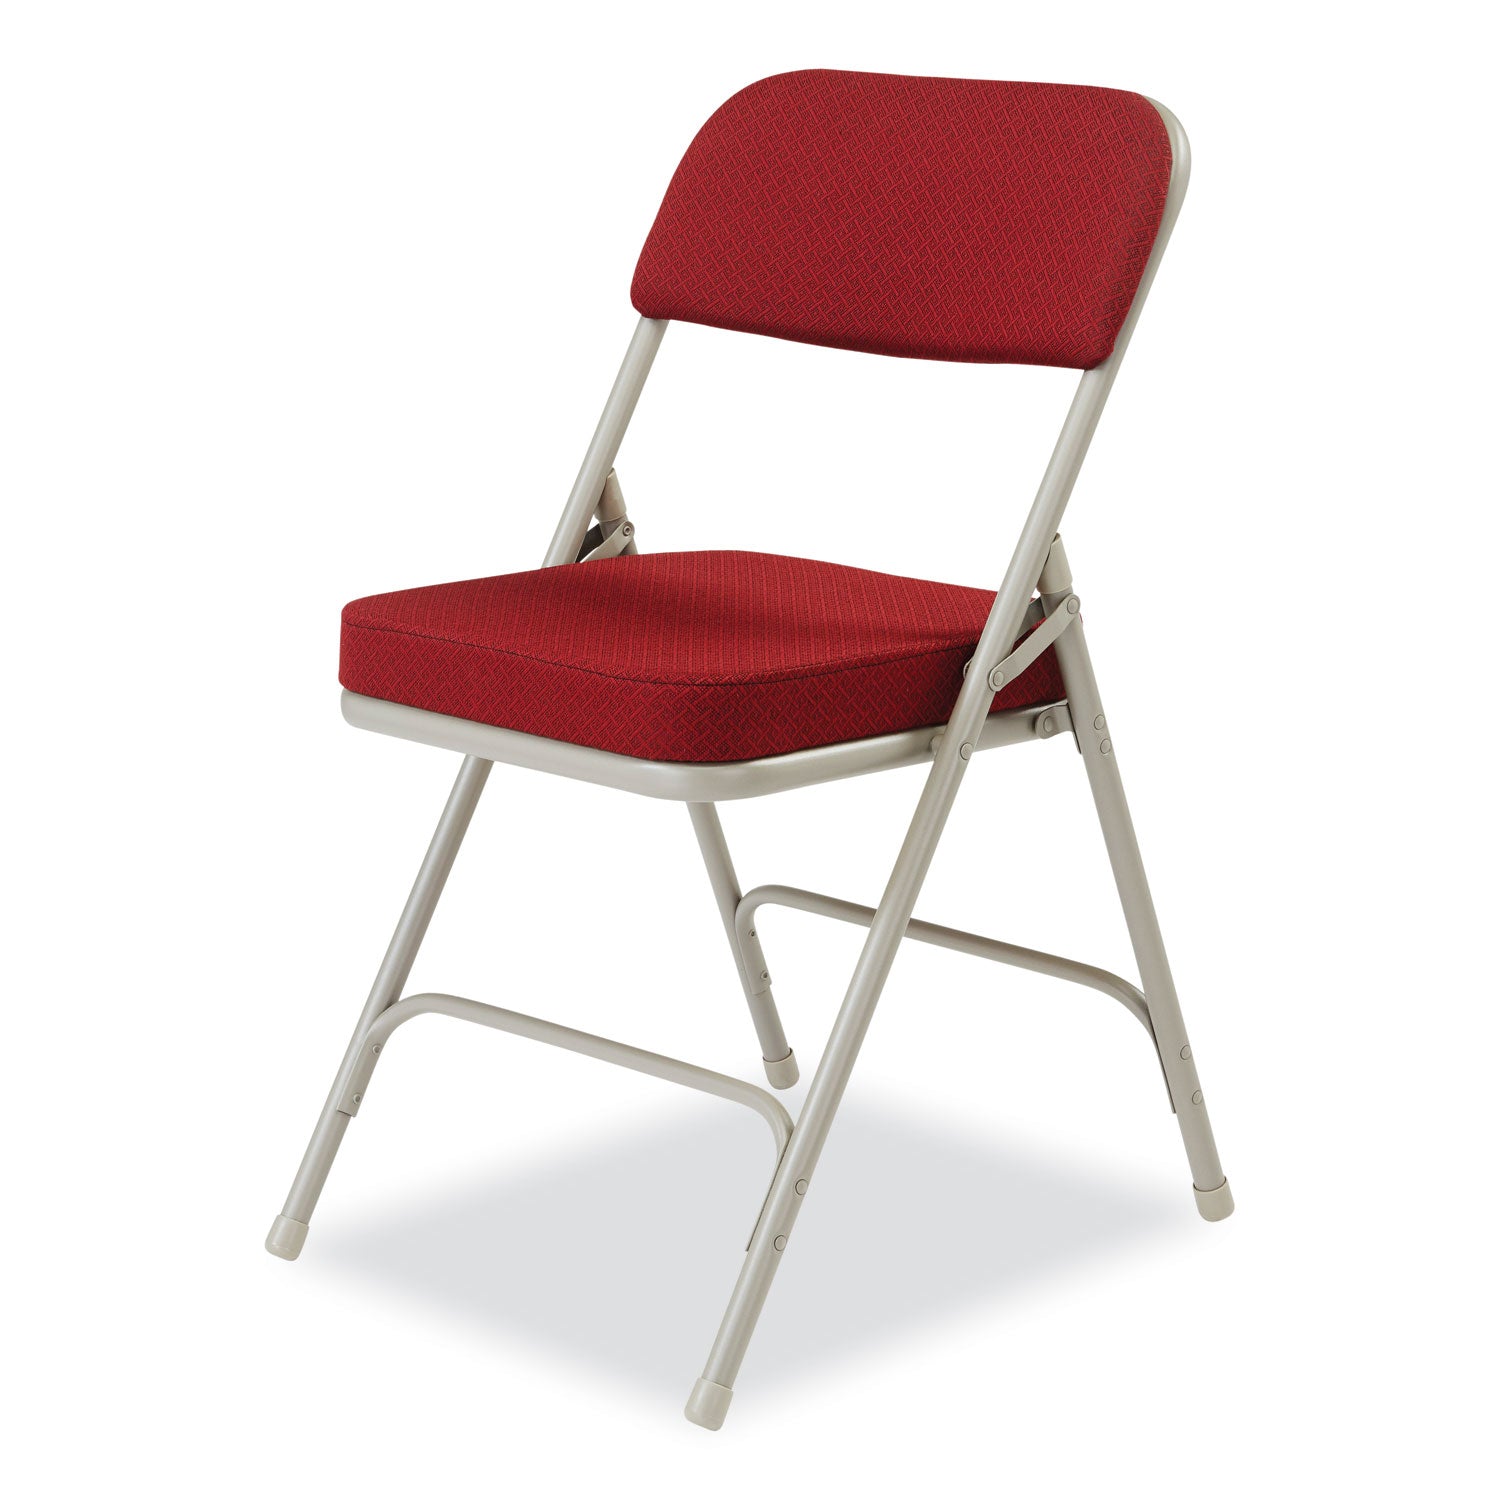 3200-series-premium-fabric-dual-hinge-folding-chair-supports-300lb-burgundy-seat-back-gray-base2-ctships-in-1-3-bus-days_nps3218 - 3